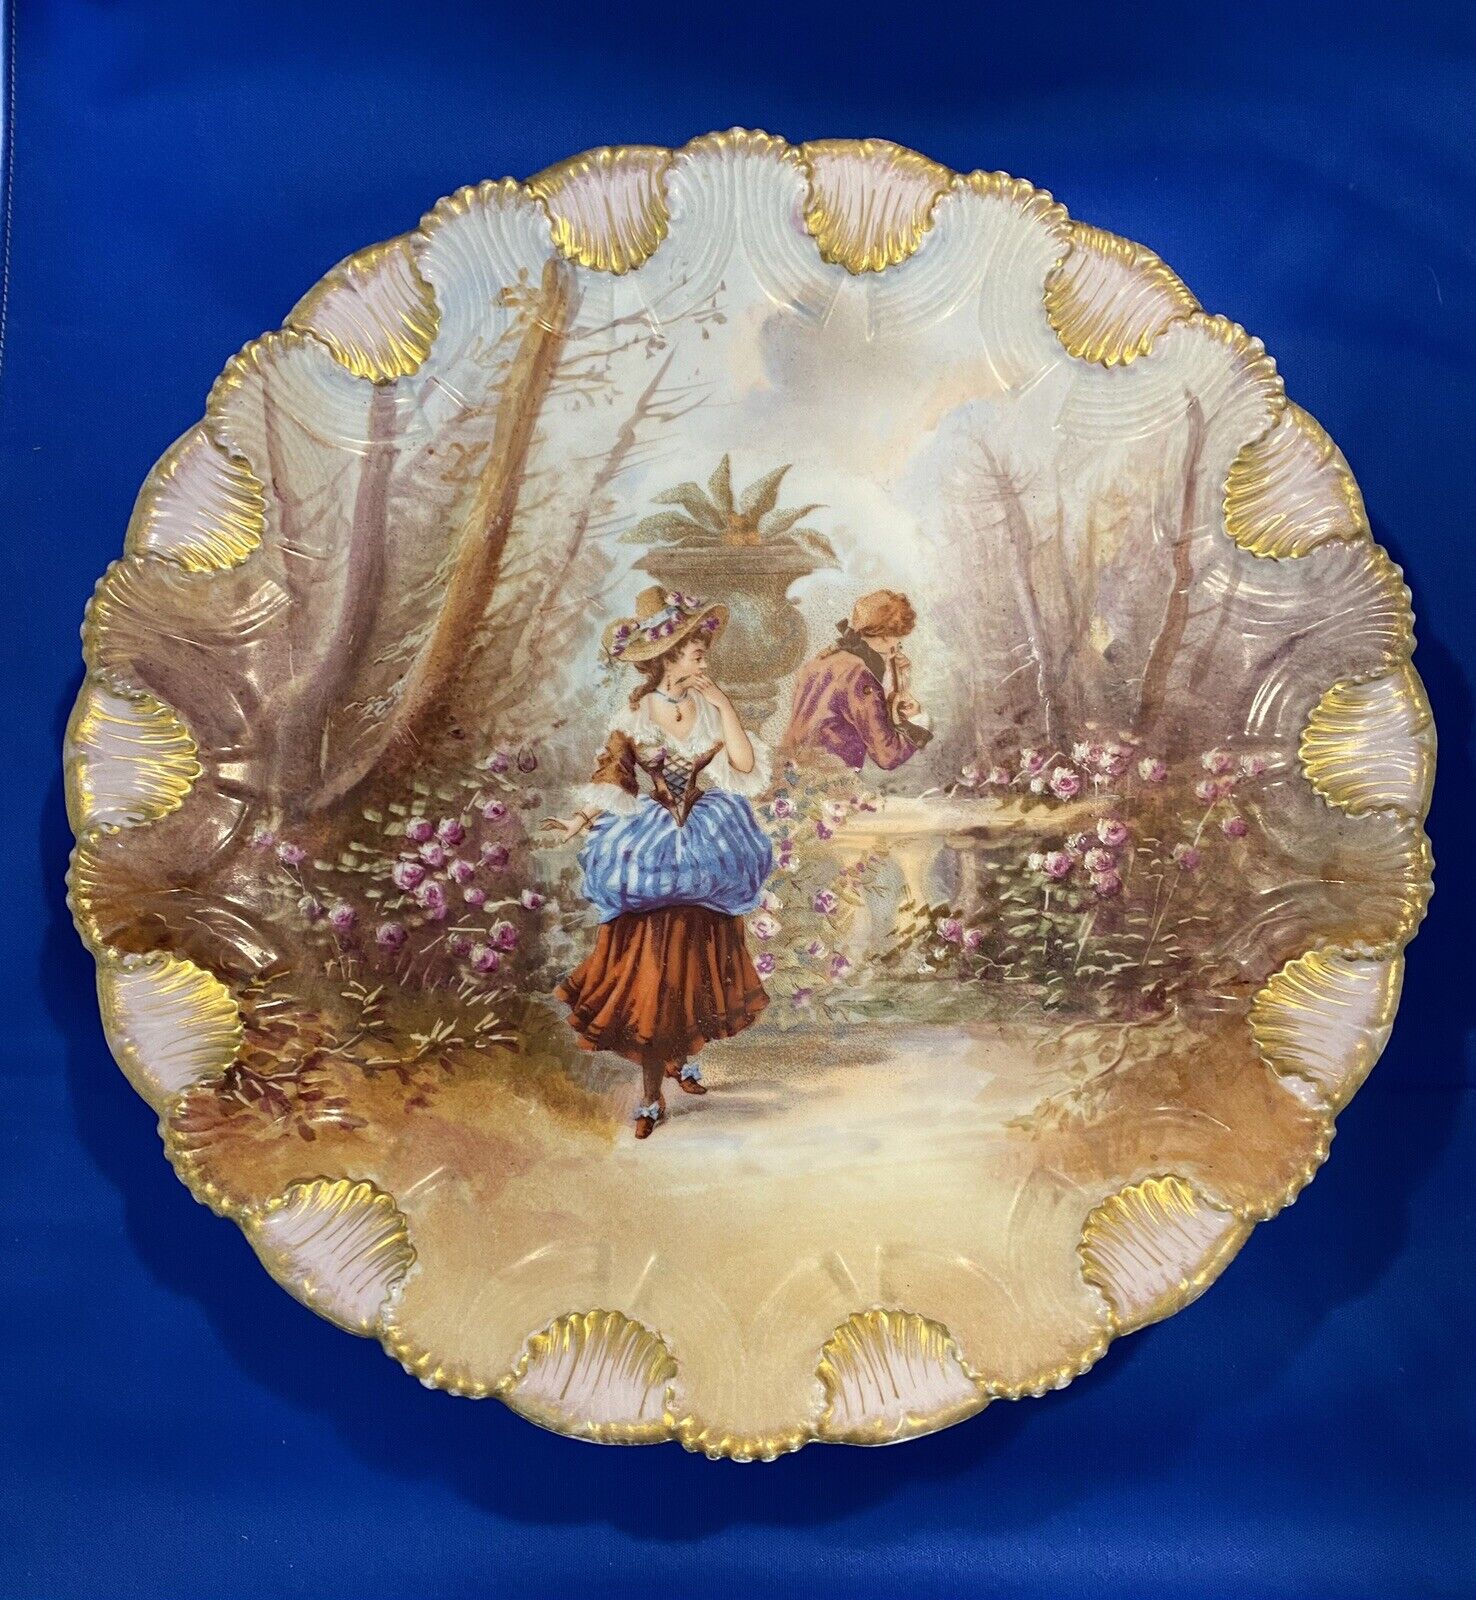 LS&S Limoges Vintage French Charger Plate Courting Couple 12.25 inch